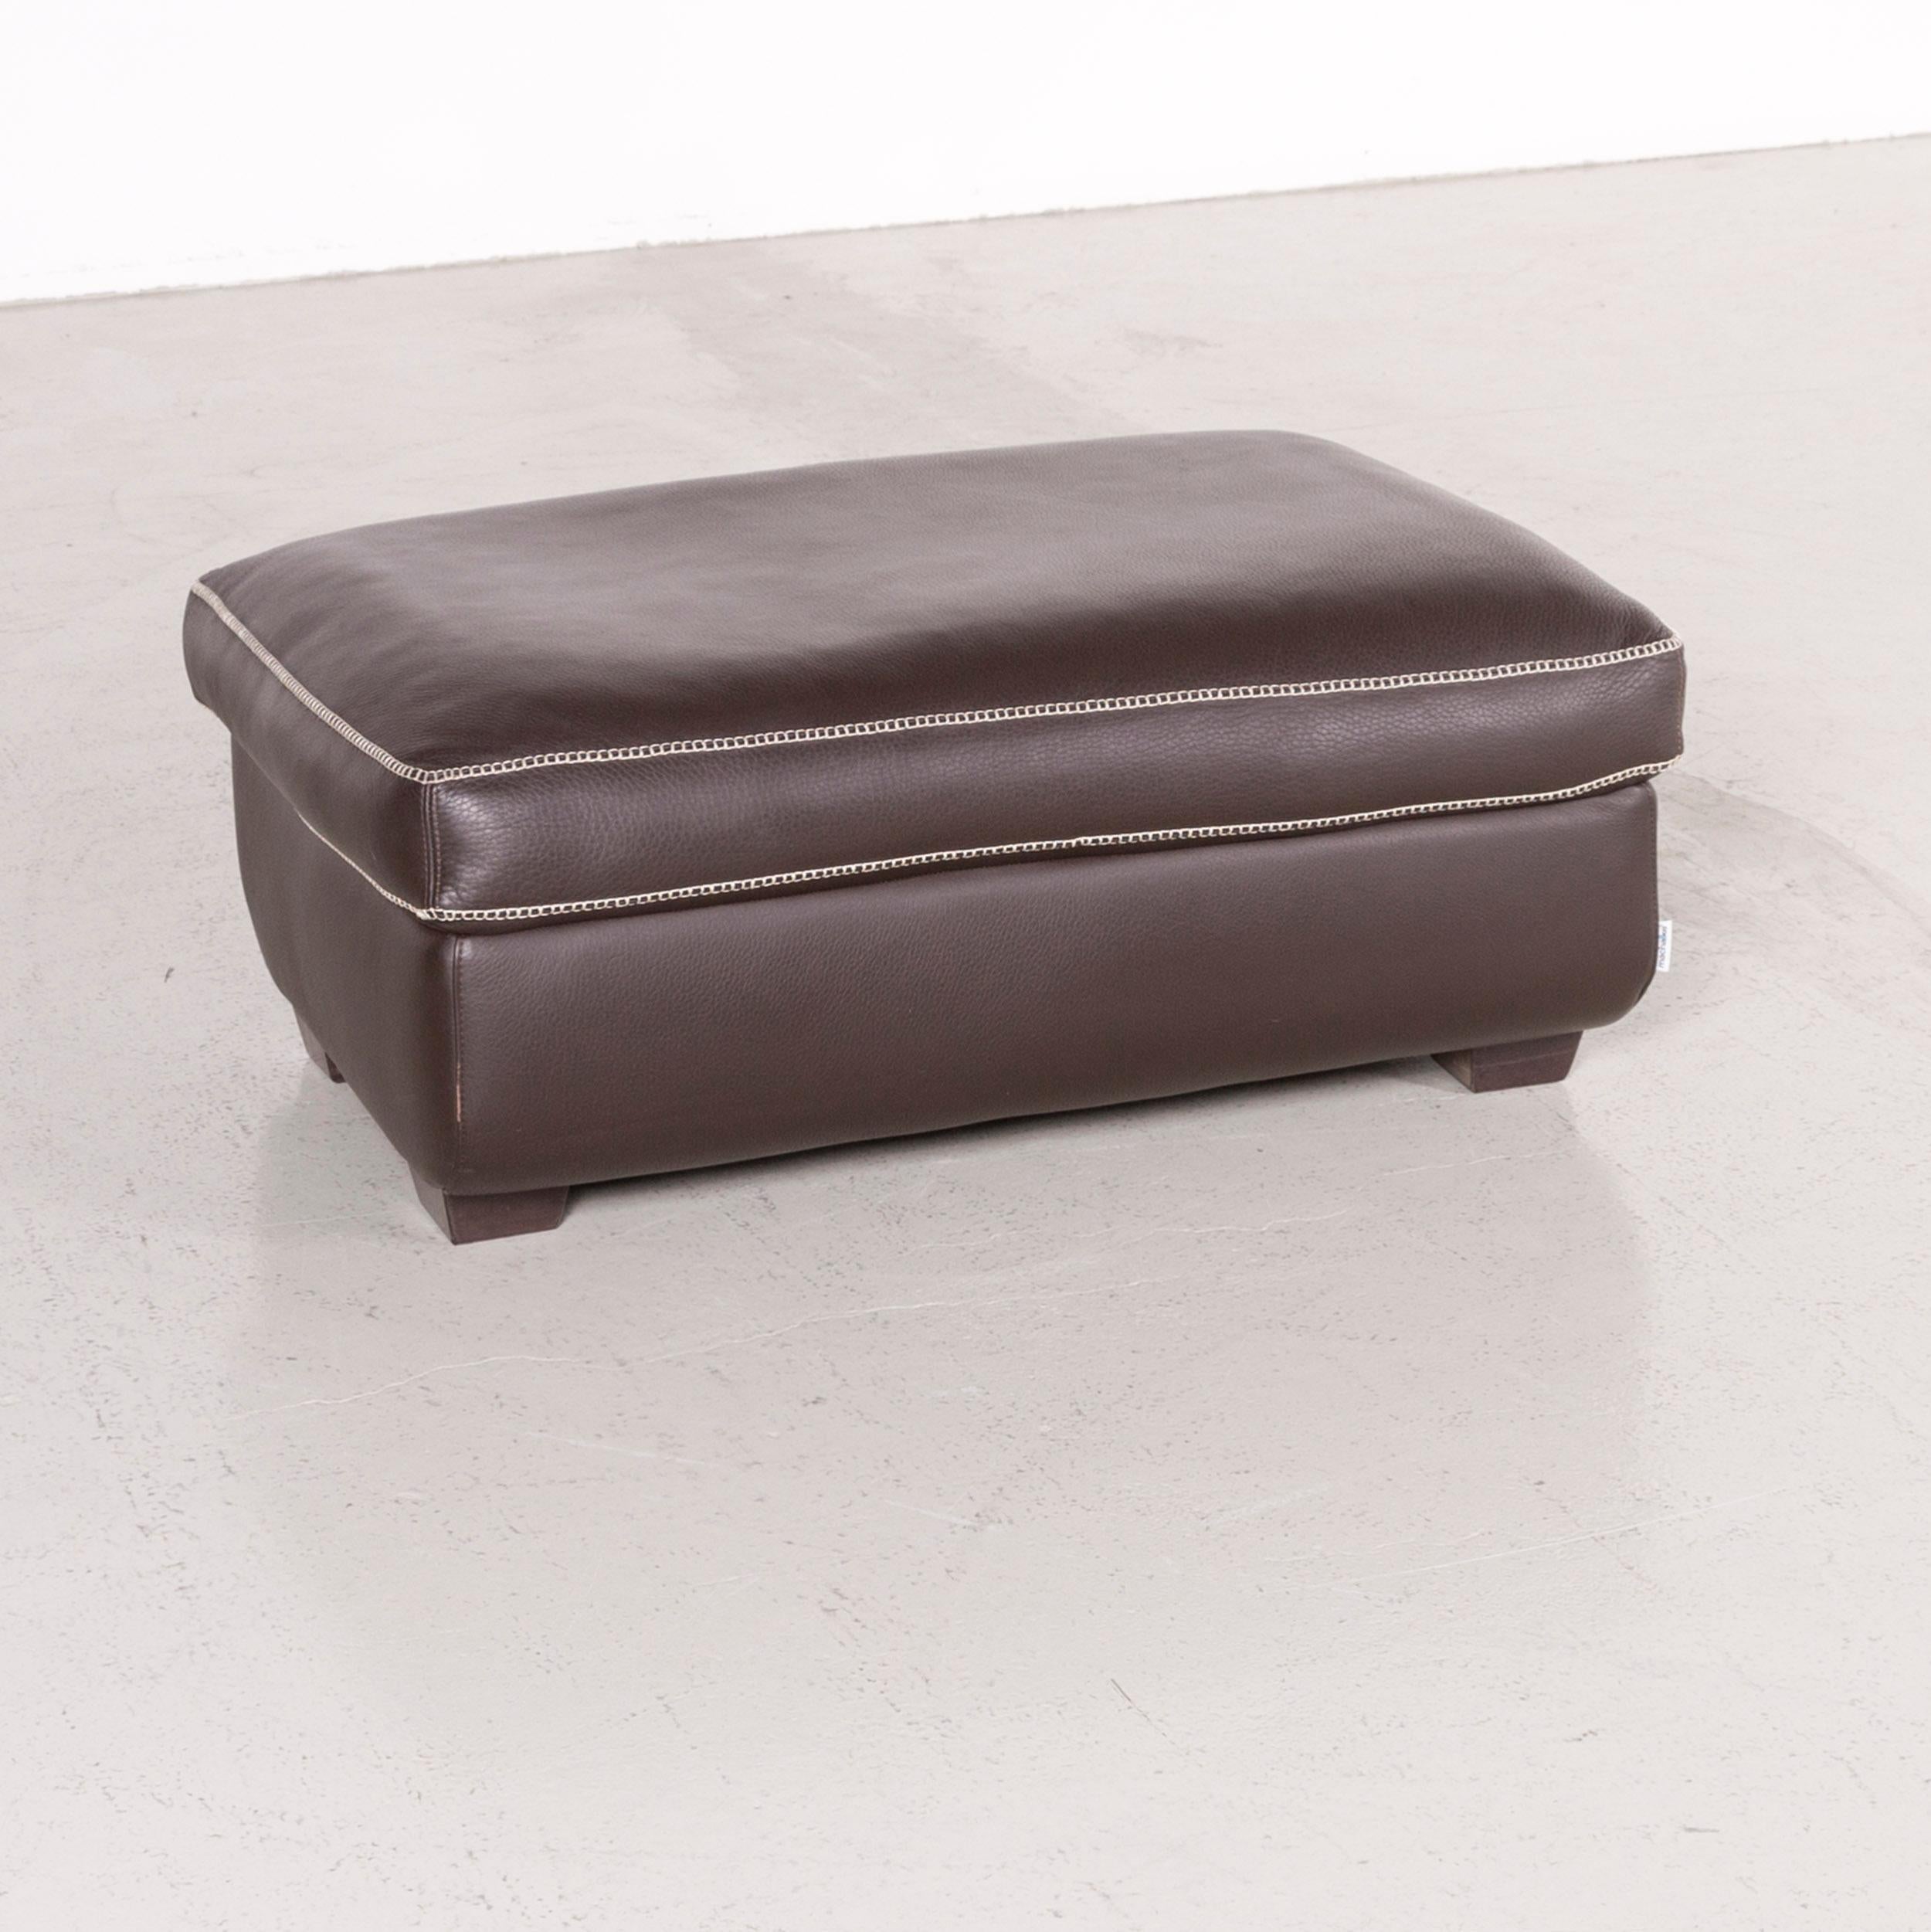 We bring to you a Machalke Valentino designer leather footstool brown.